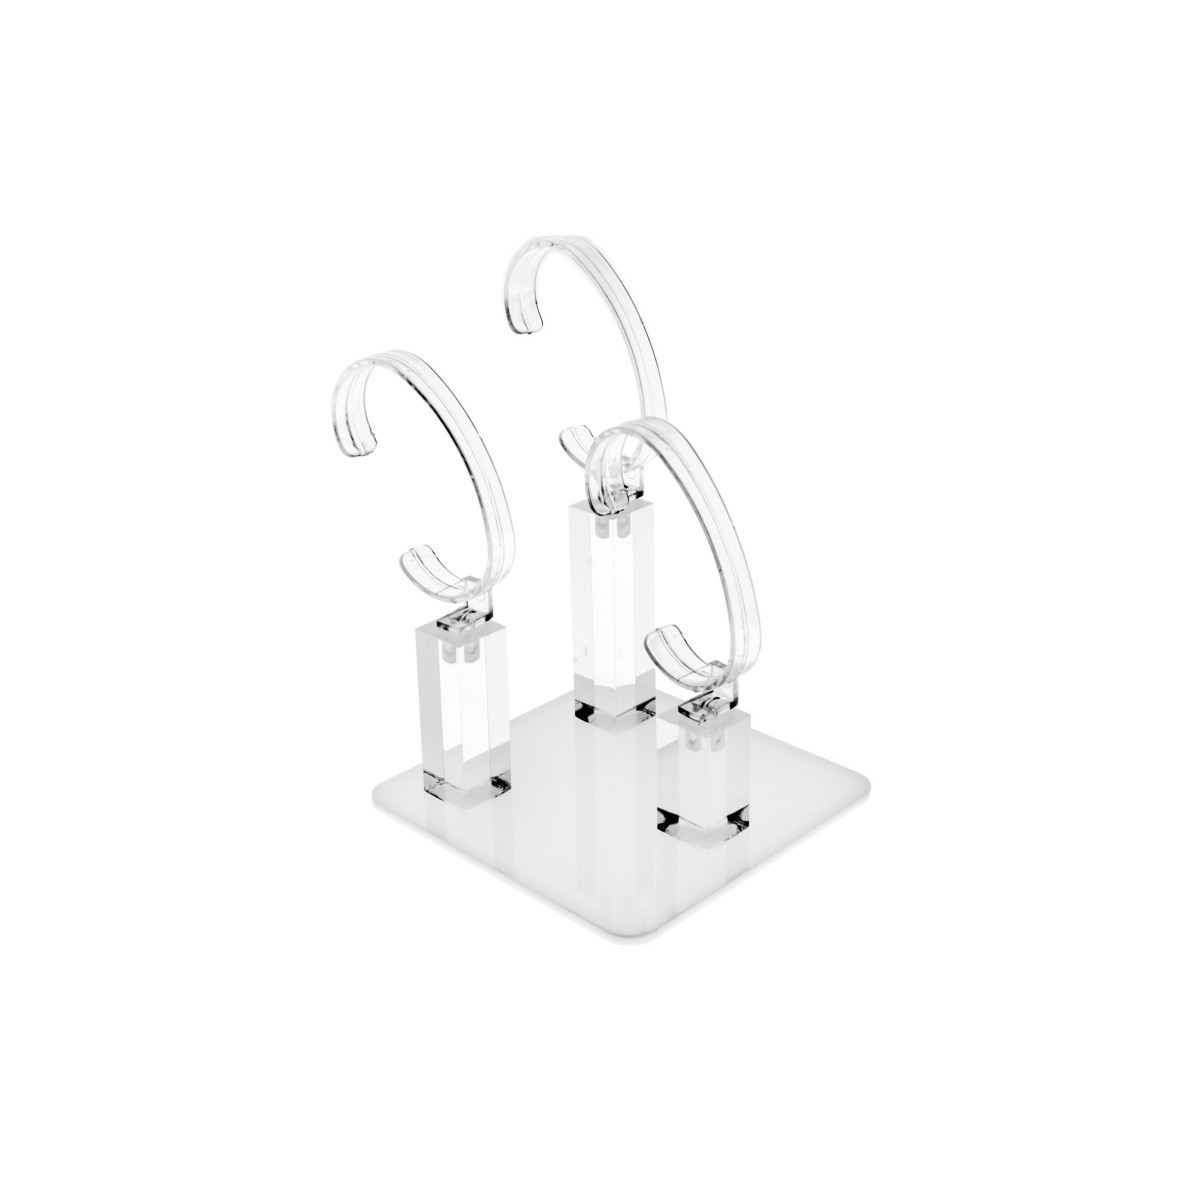 Clear and White wrist watch display holder stand, for 3 bracelet watches